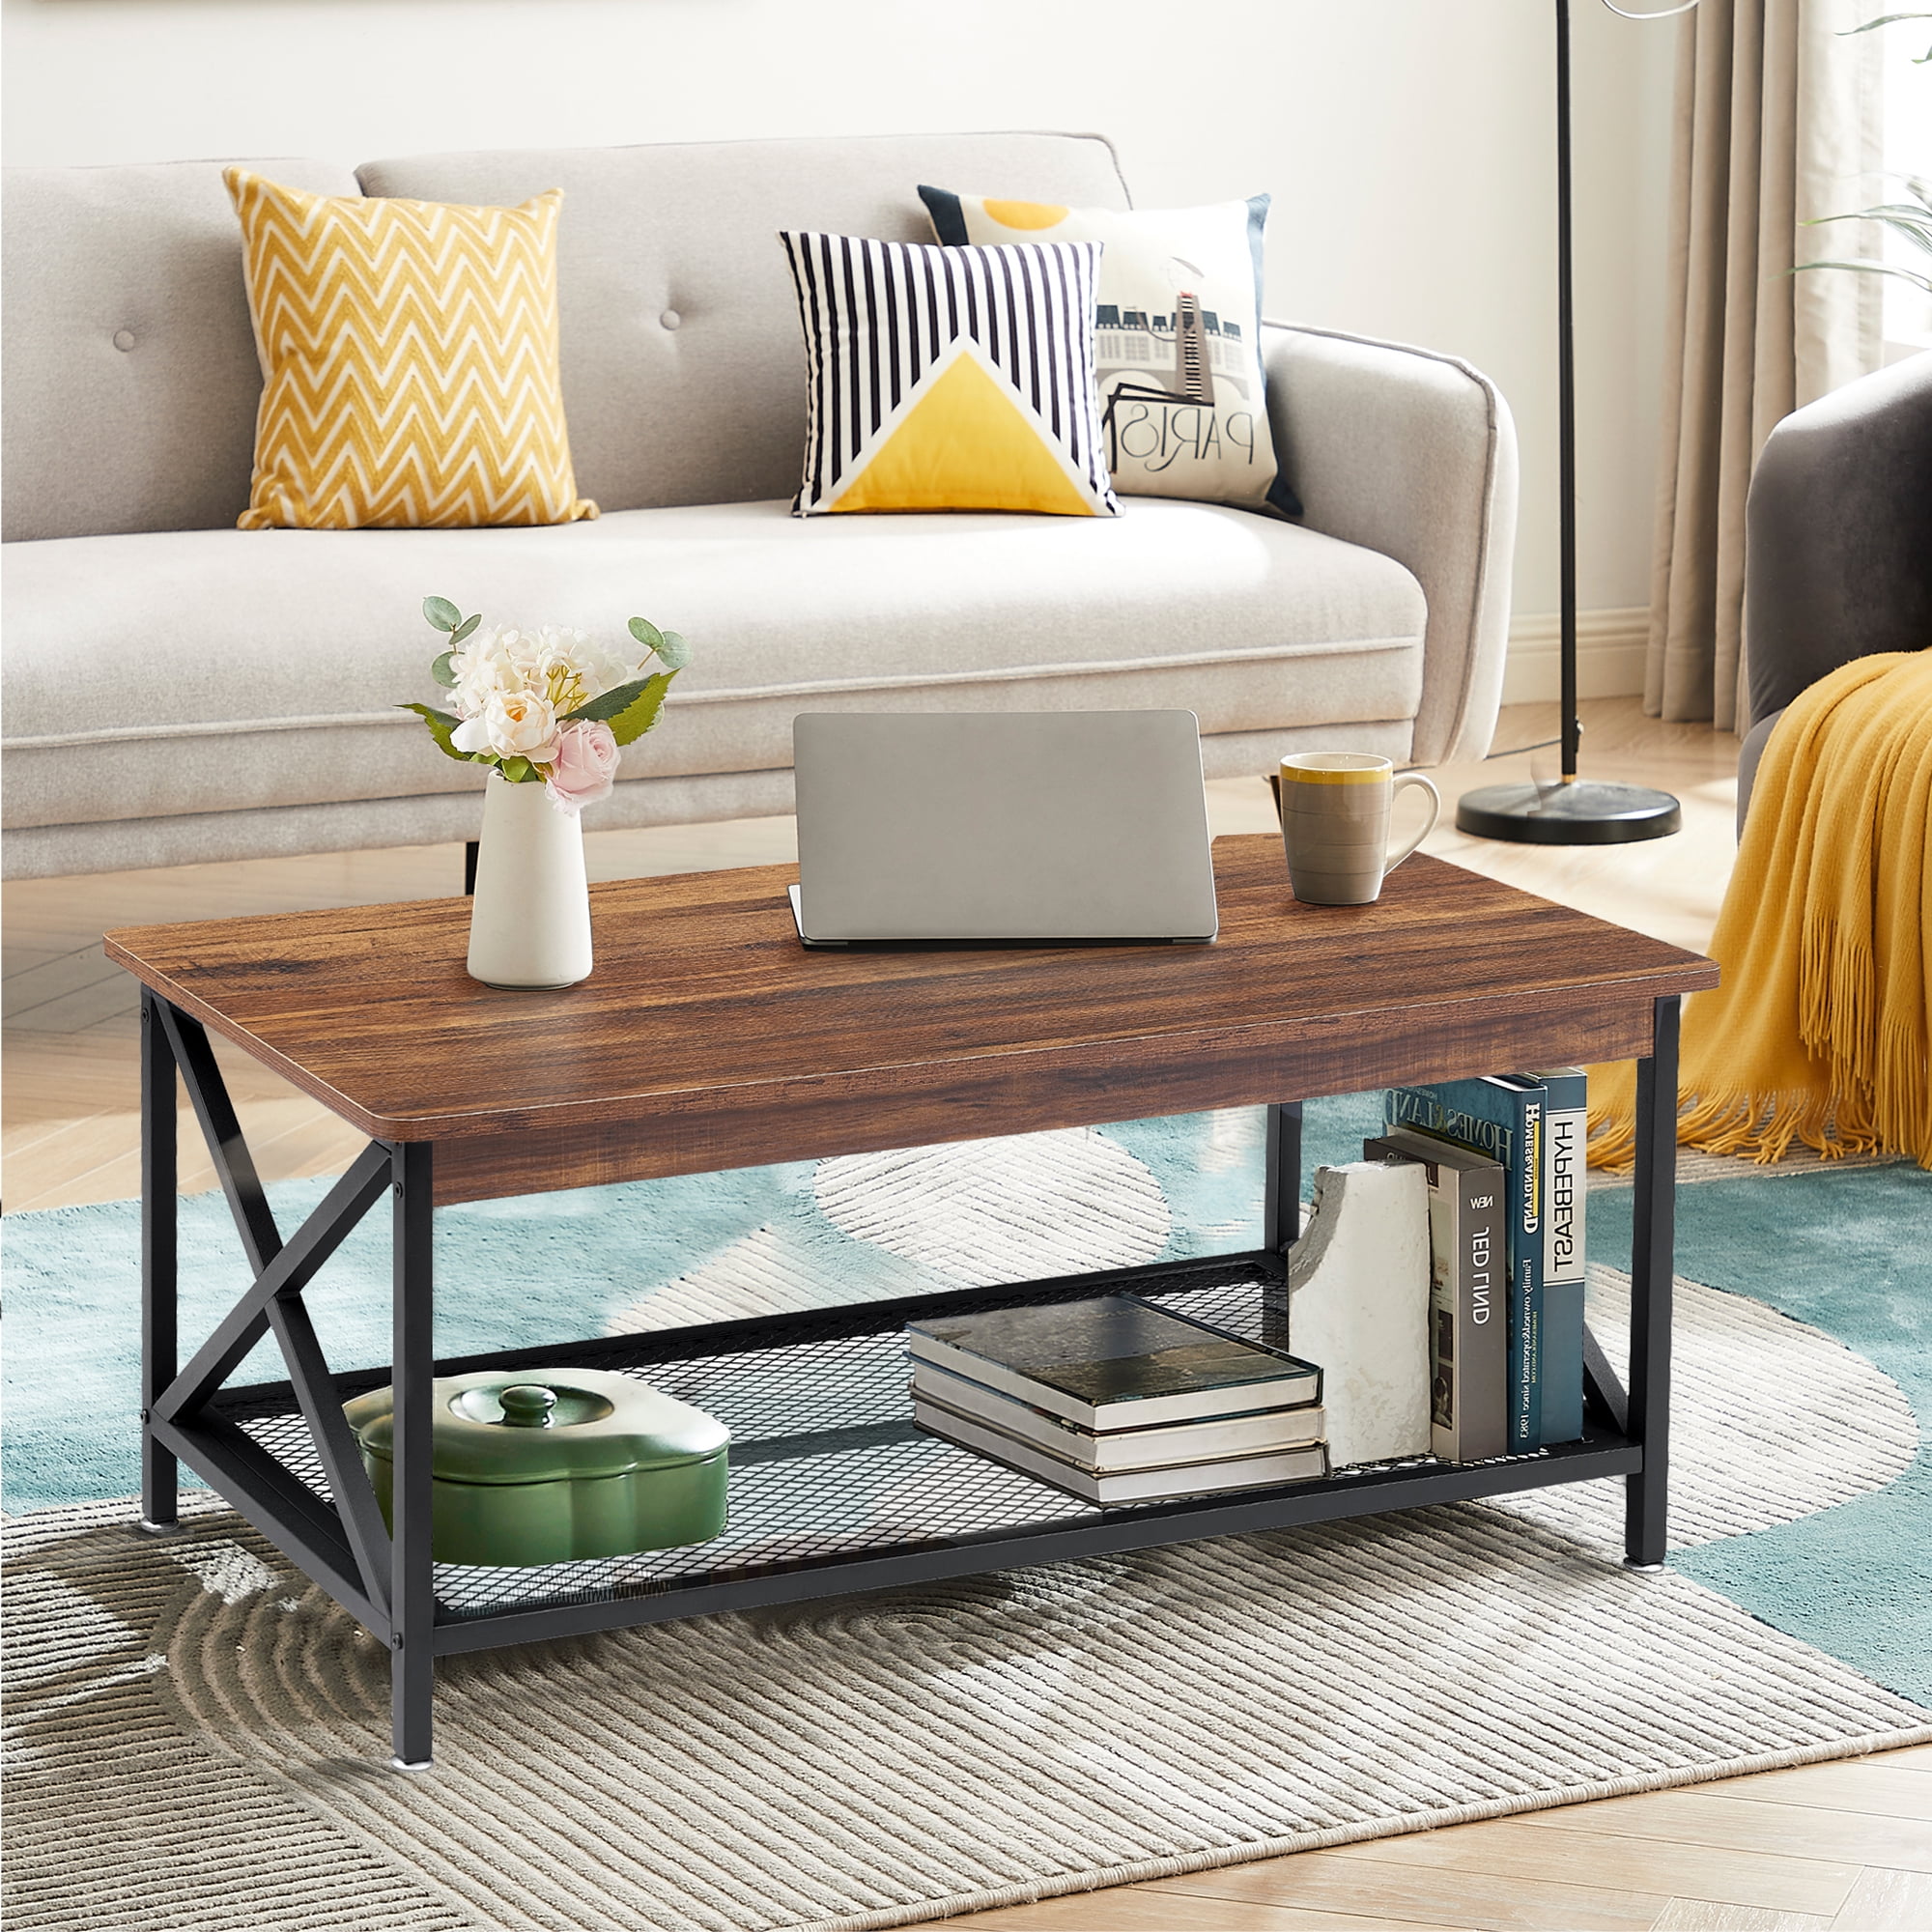 VECELO Rectangle Wood Coffee Table, Industrial Home Tea Table Desk with ...